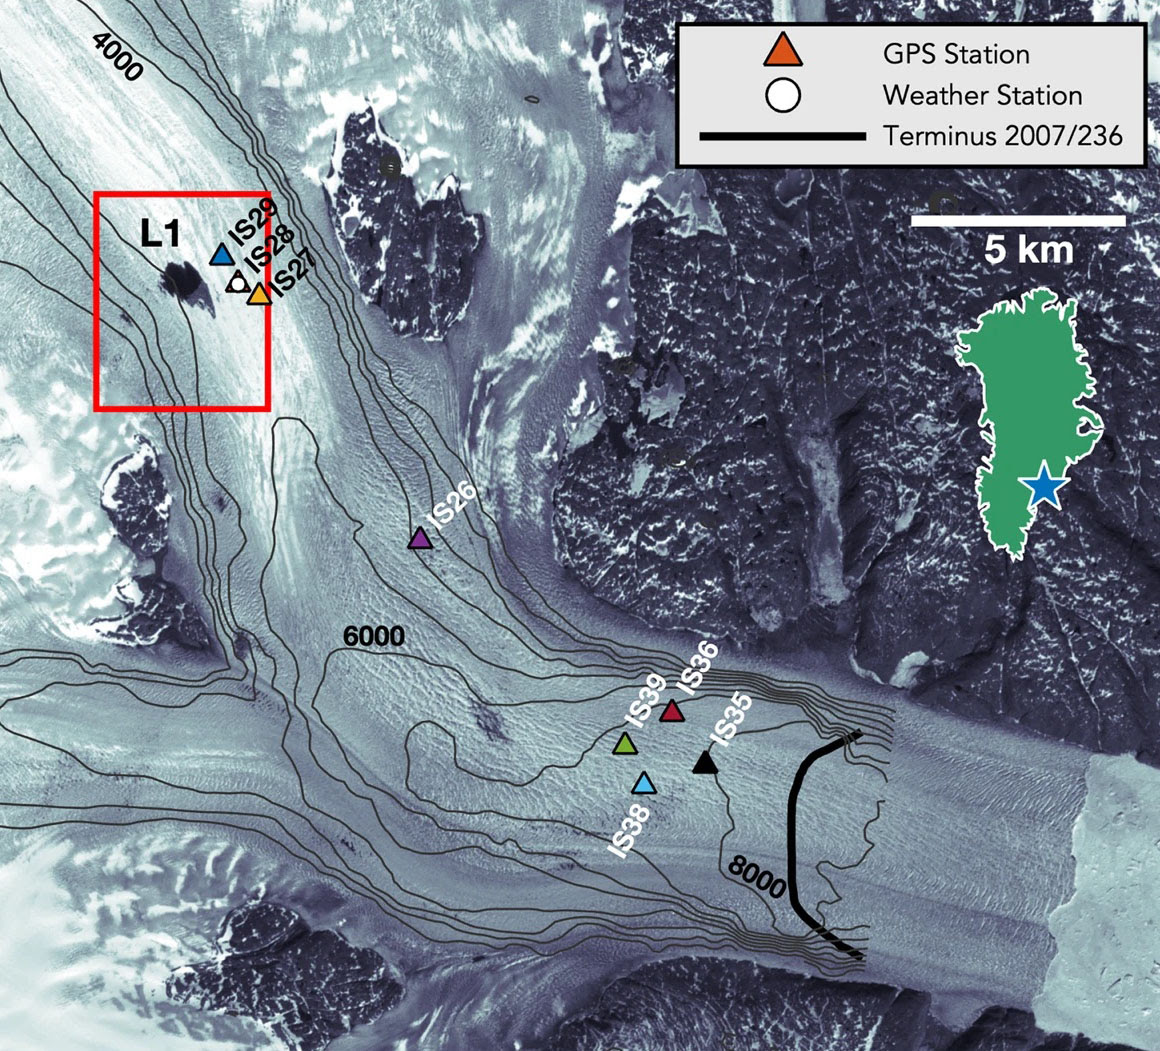 satellite image of glacier and instrument locations